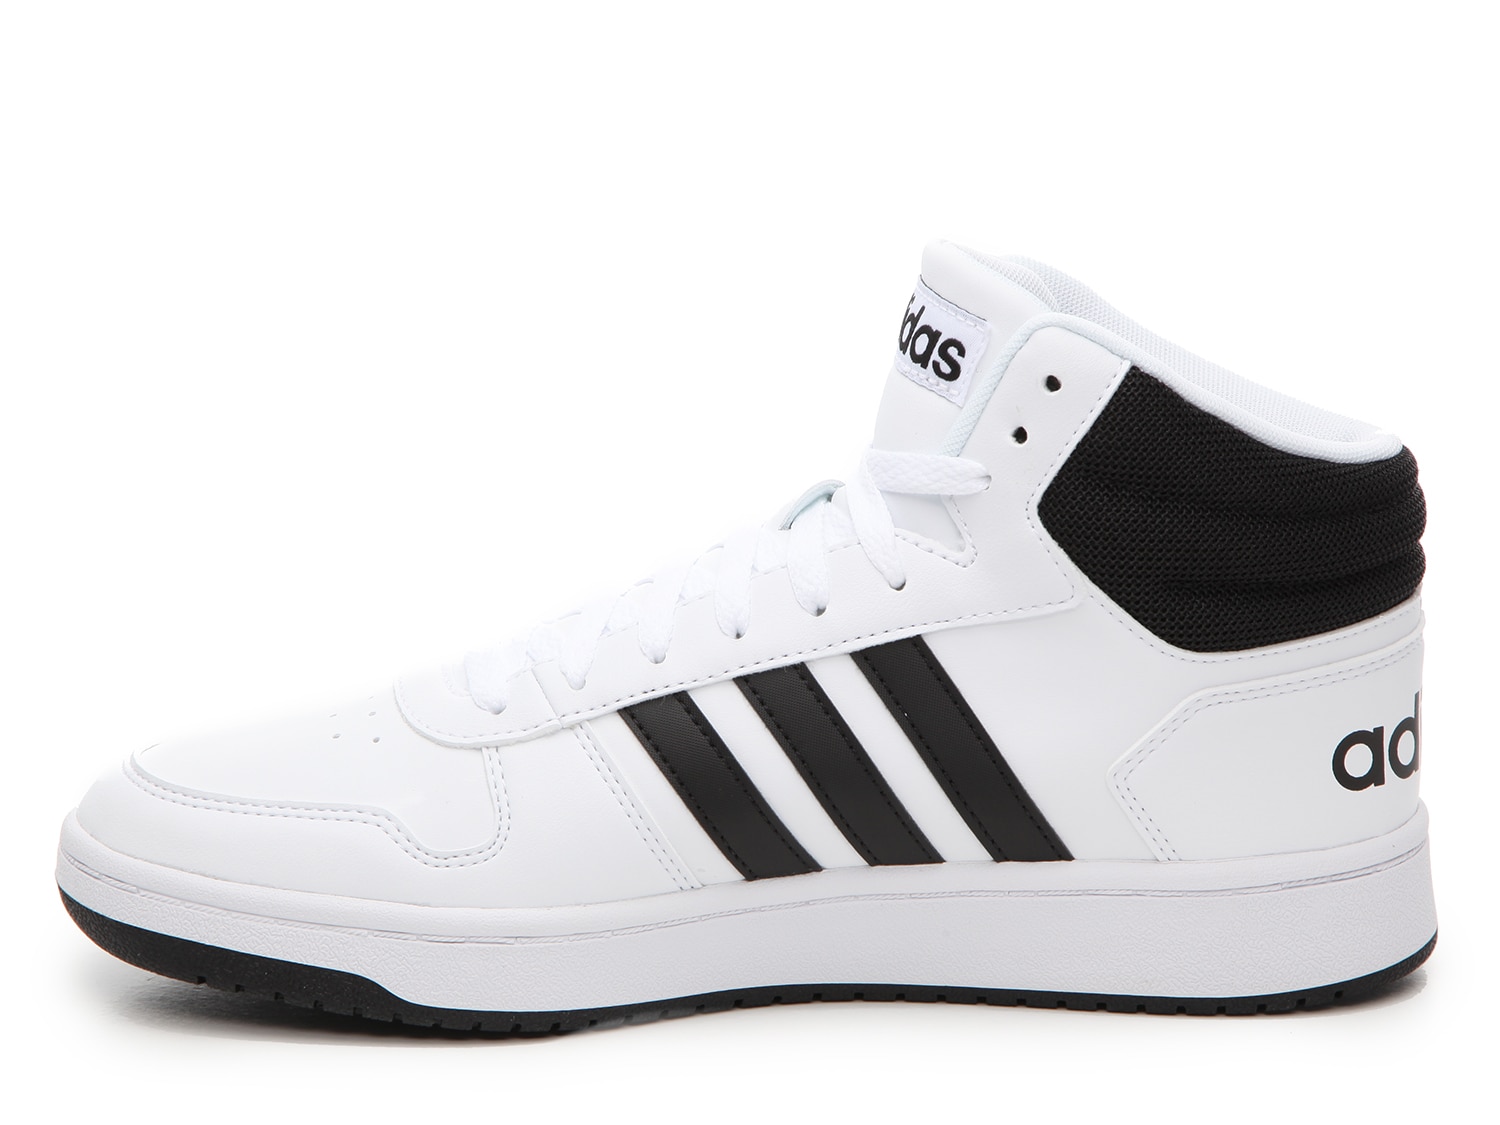 adidas hoops mid white